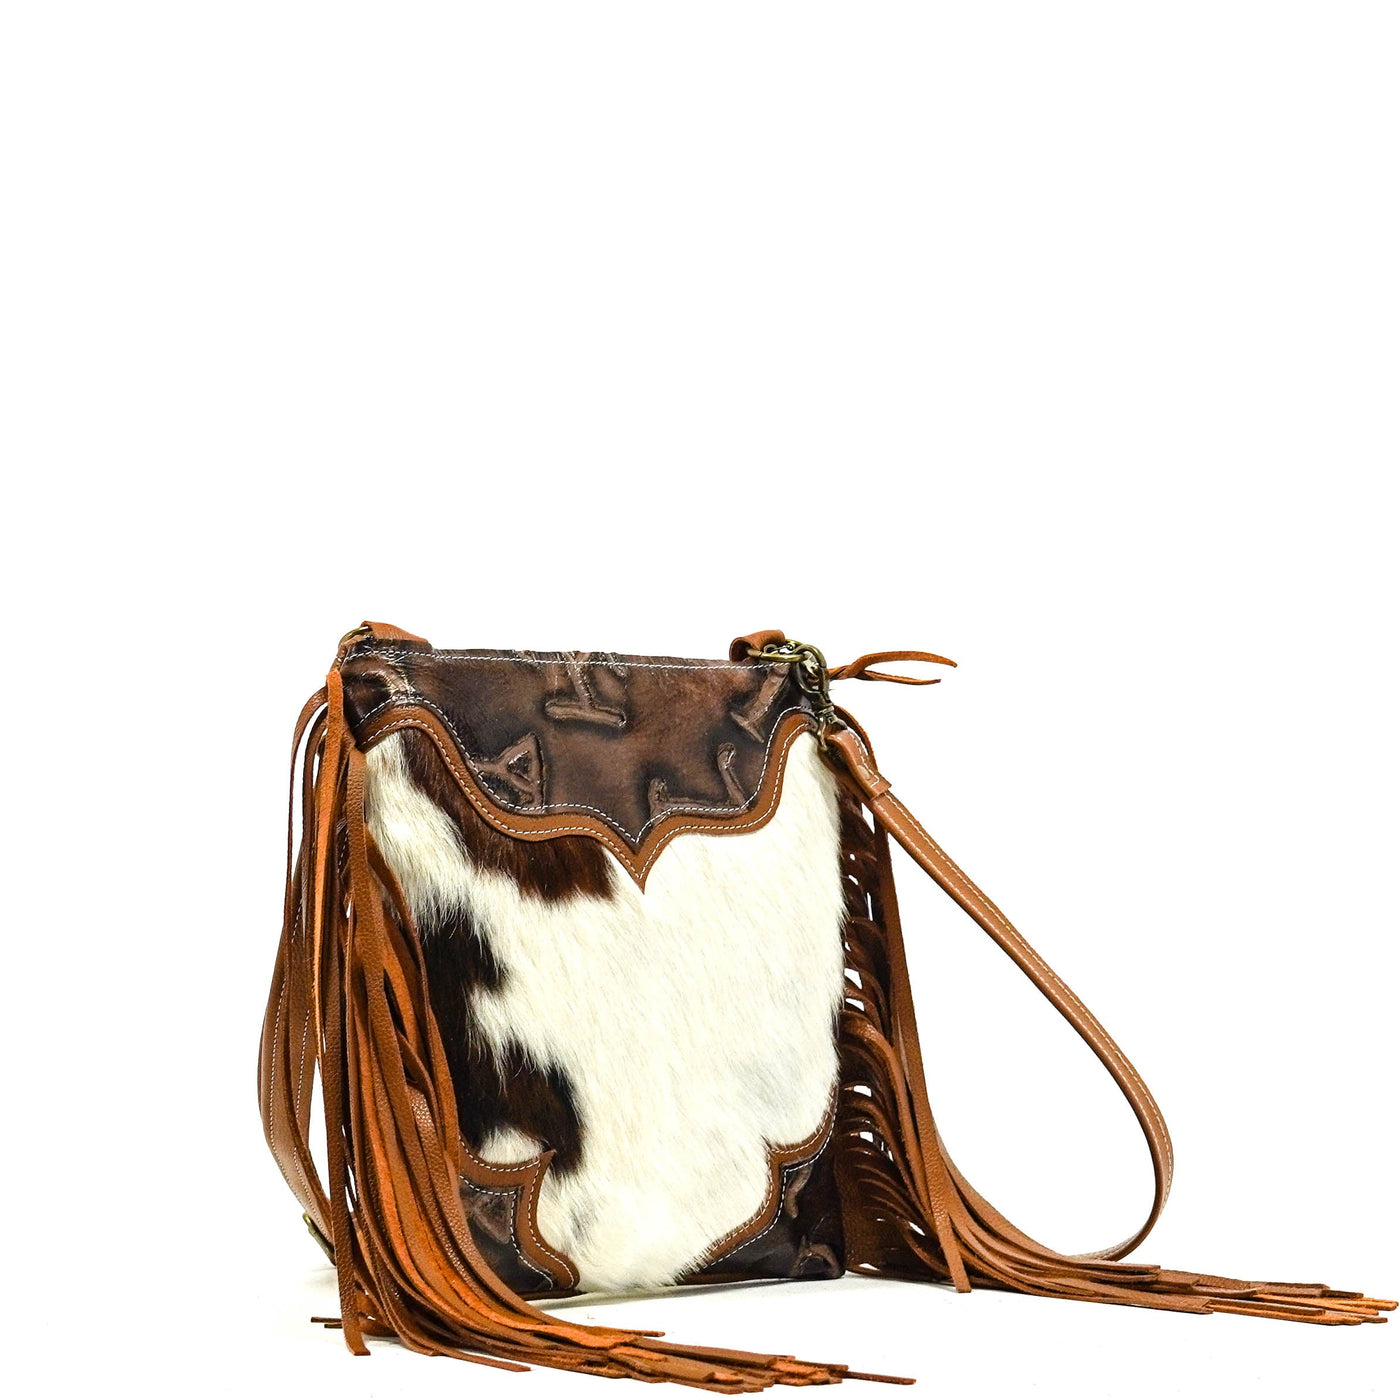 Shania - Tricolor w/ Mahogany Brands-Shania-Western-Cowhide-Bags-Handmade-Products-Gifts-Dancing Cactus Designs